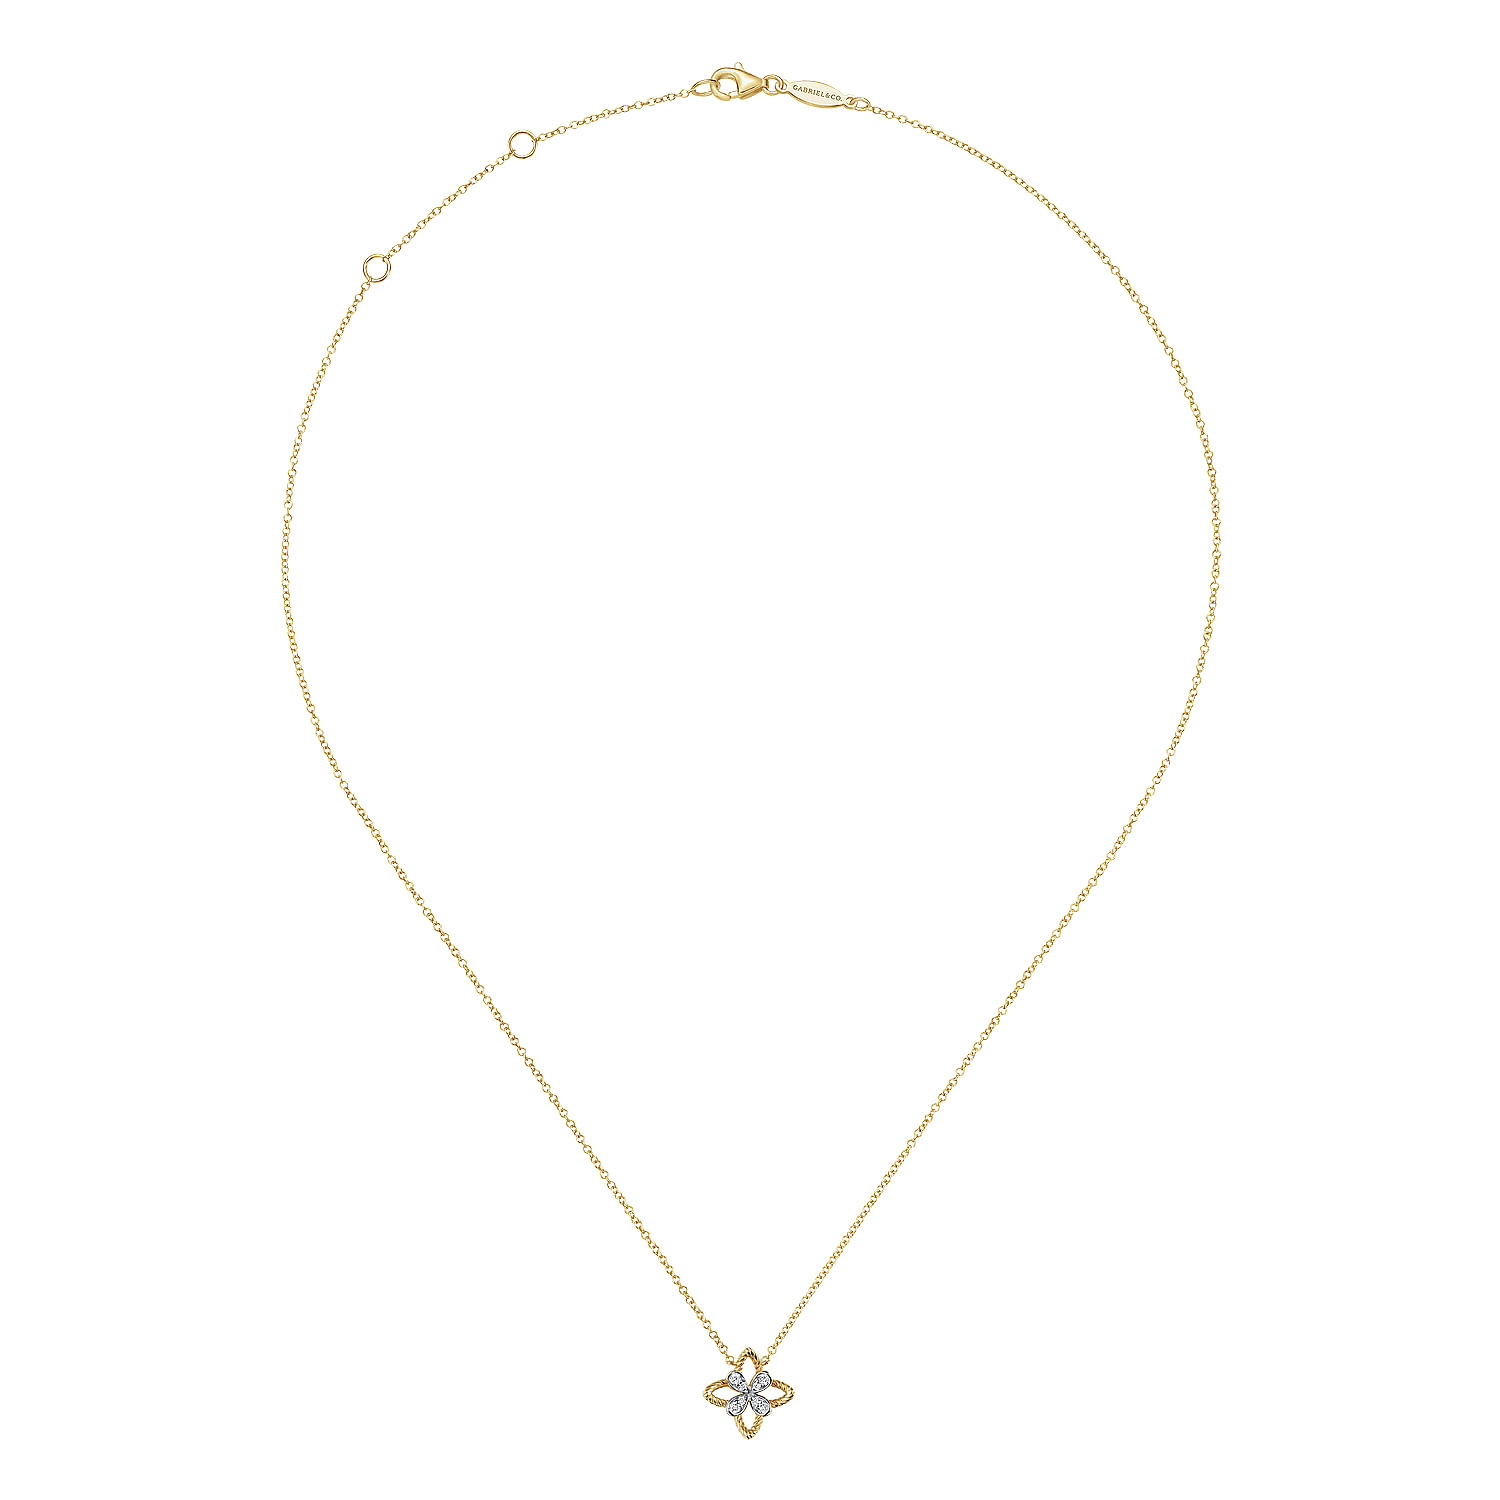 14K Yellow Gold Twisted Rope Clover Pendant Necklace with Diamond Petals - 0.07 ct - Shot 2